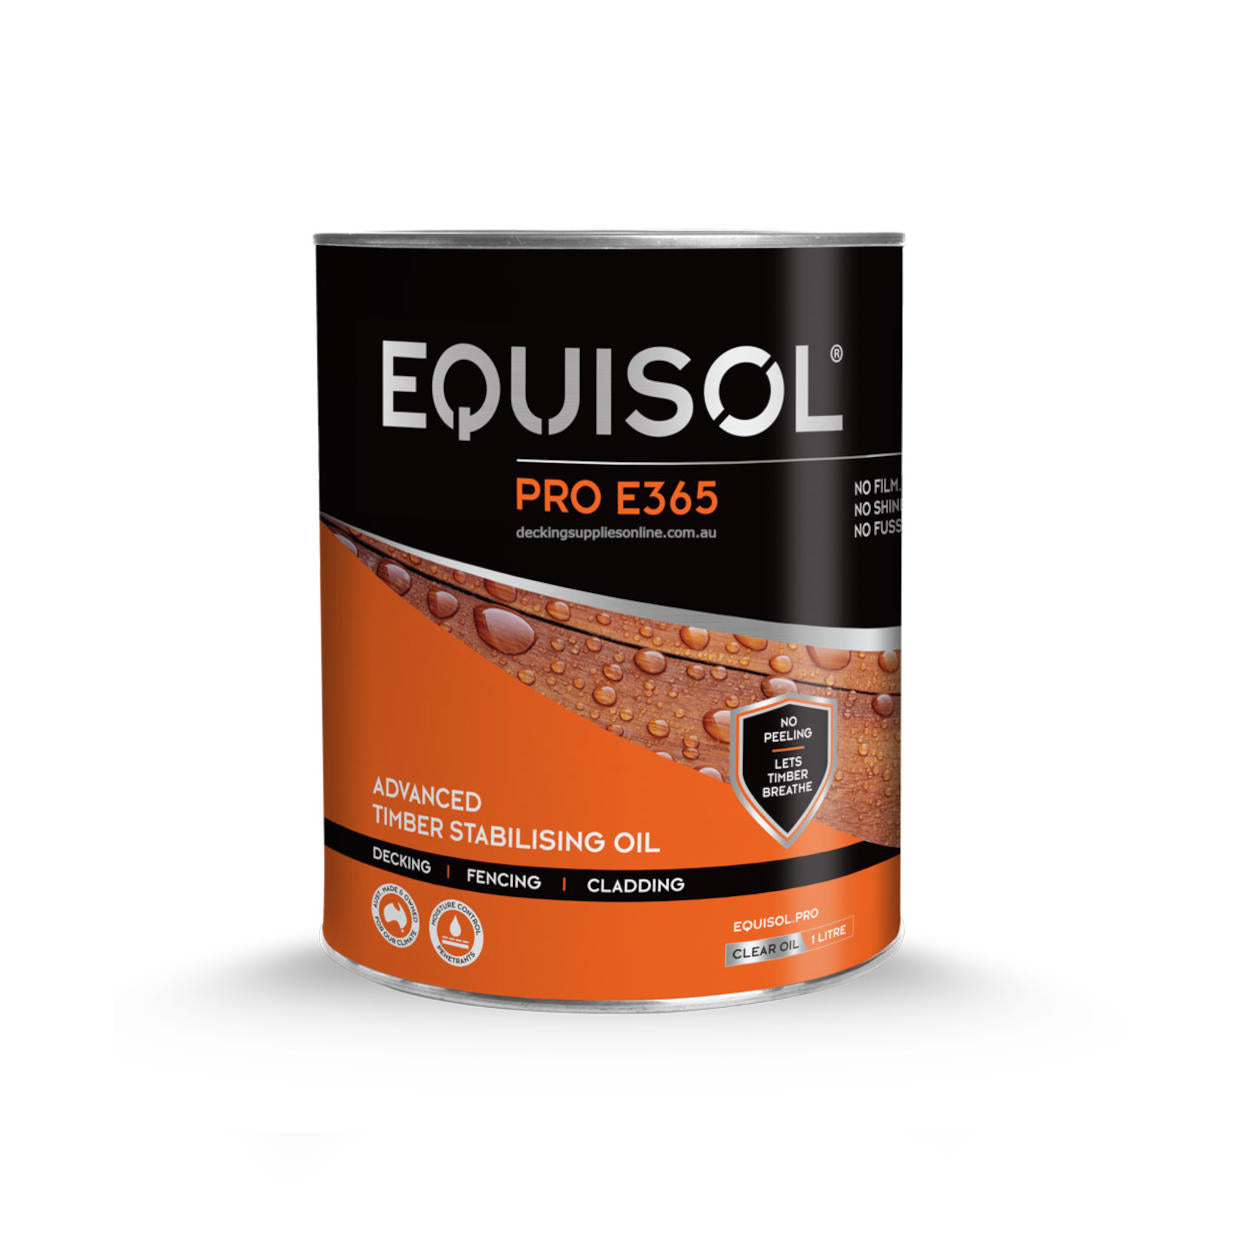 EQUISOL - Pro E365 - Fast Drying Decking Oil